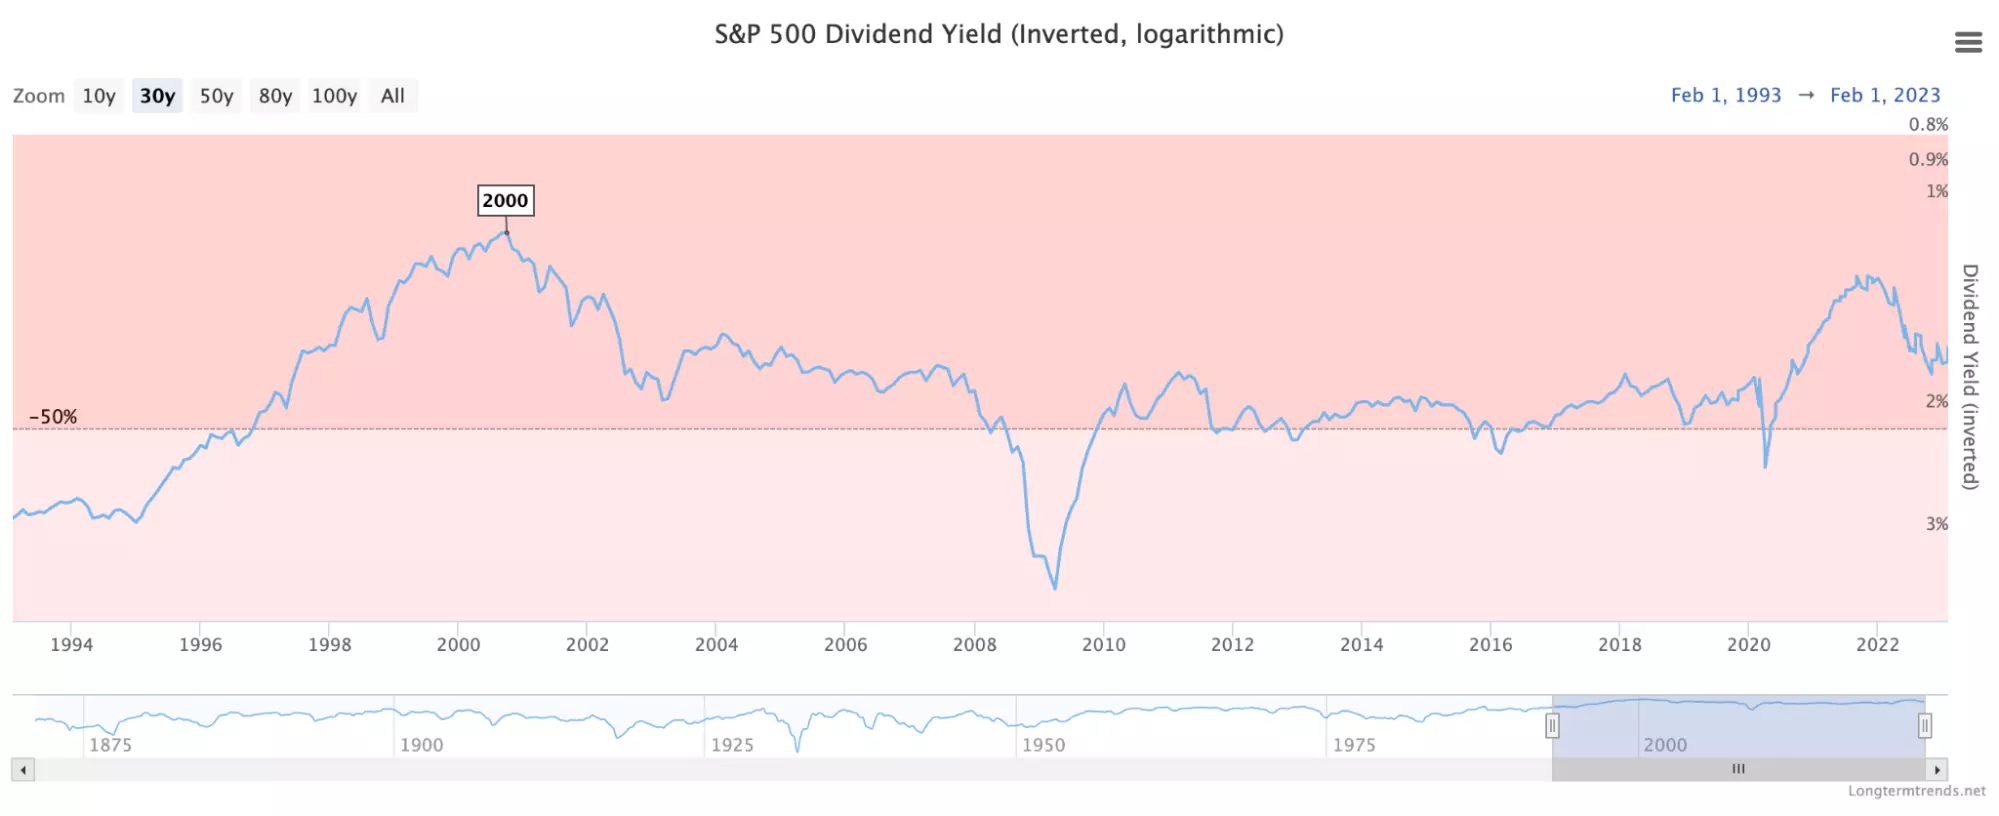 30-Year S&P 500 Dividend Yield : (source: Longtermtrends.com)